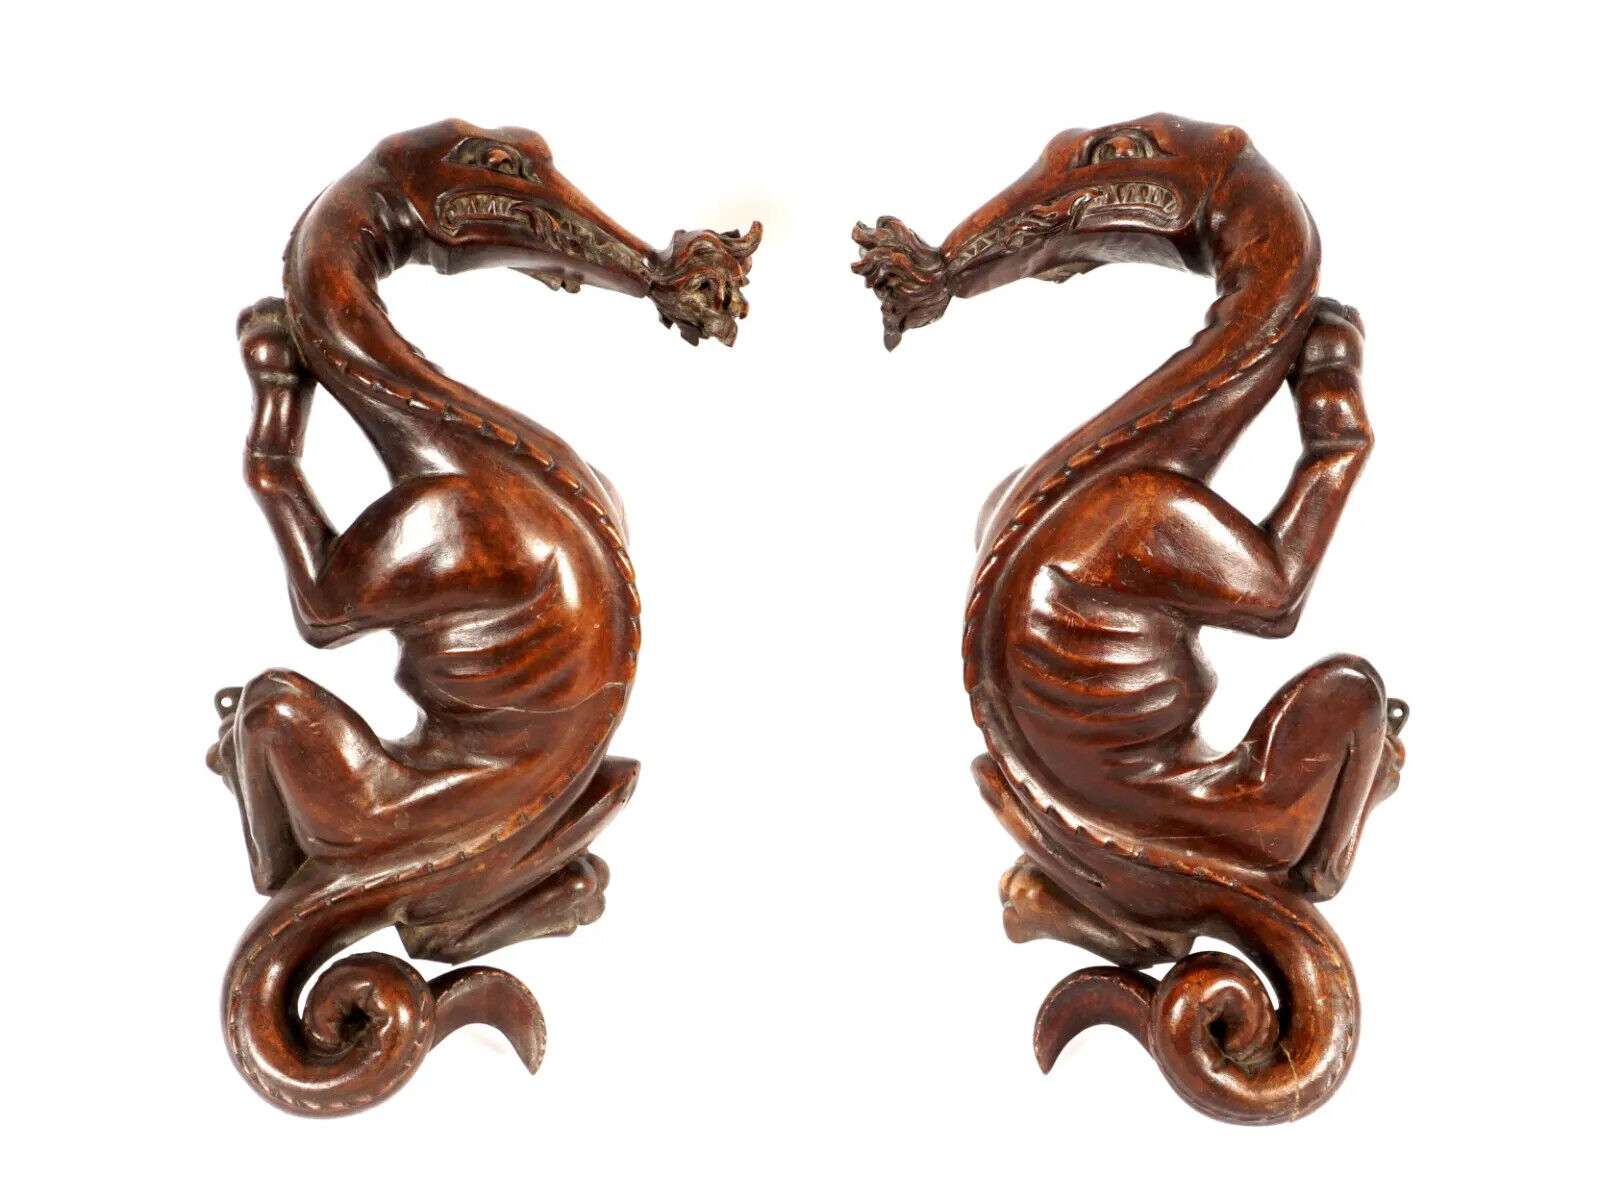 PAIR OF IMPORTANT ENGLISH CARVED DRAGON CURTAIN ROD HOLDERS 1700\'s-1800\'s